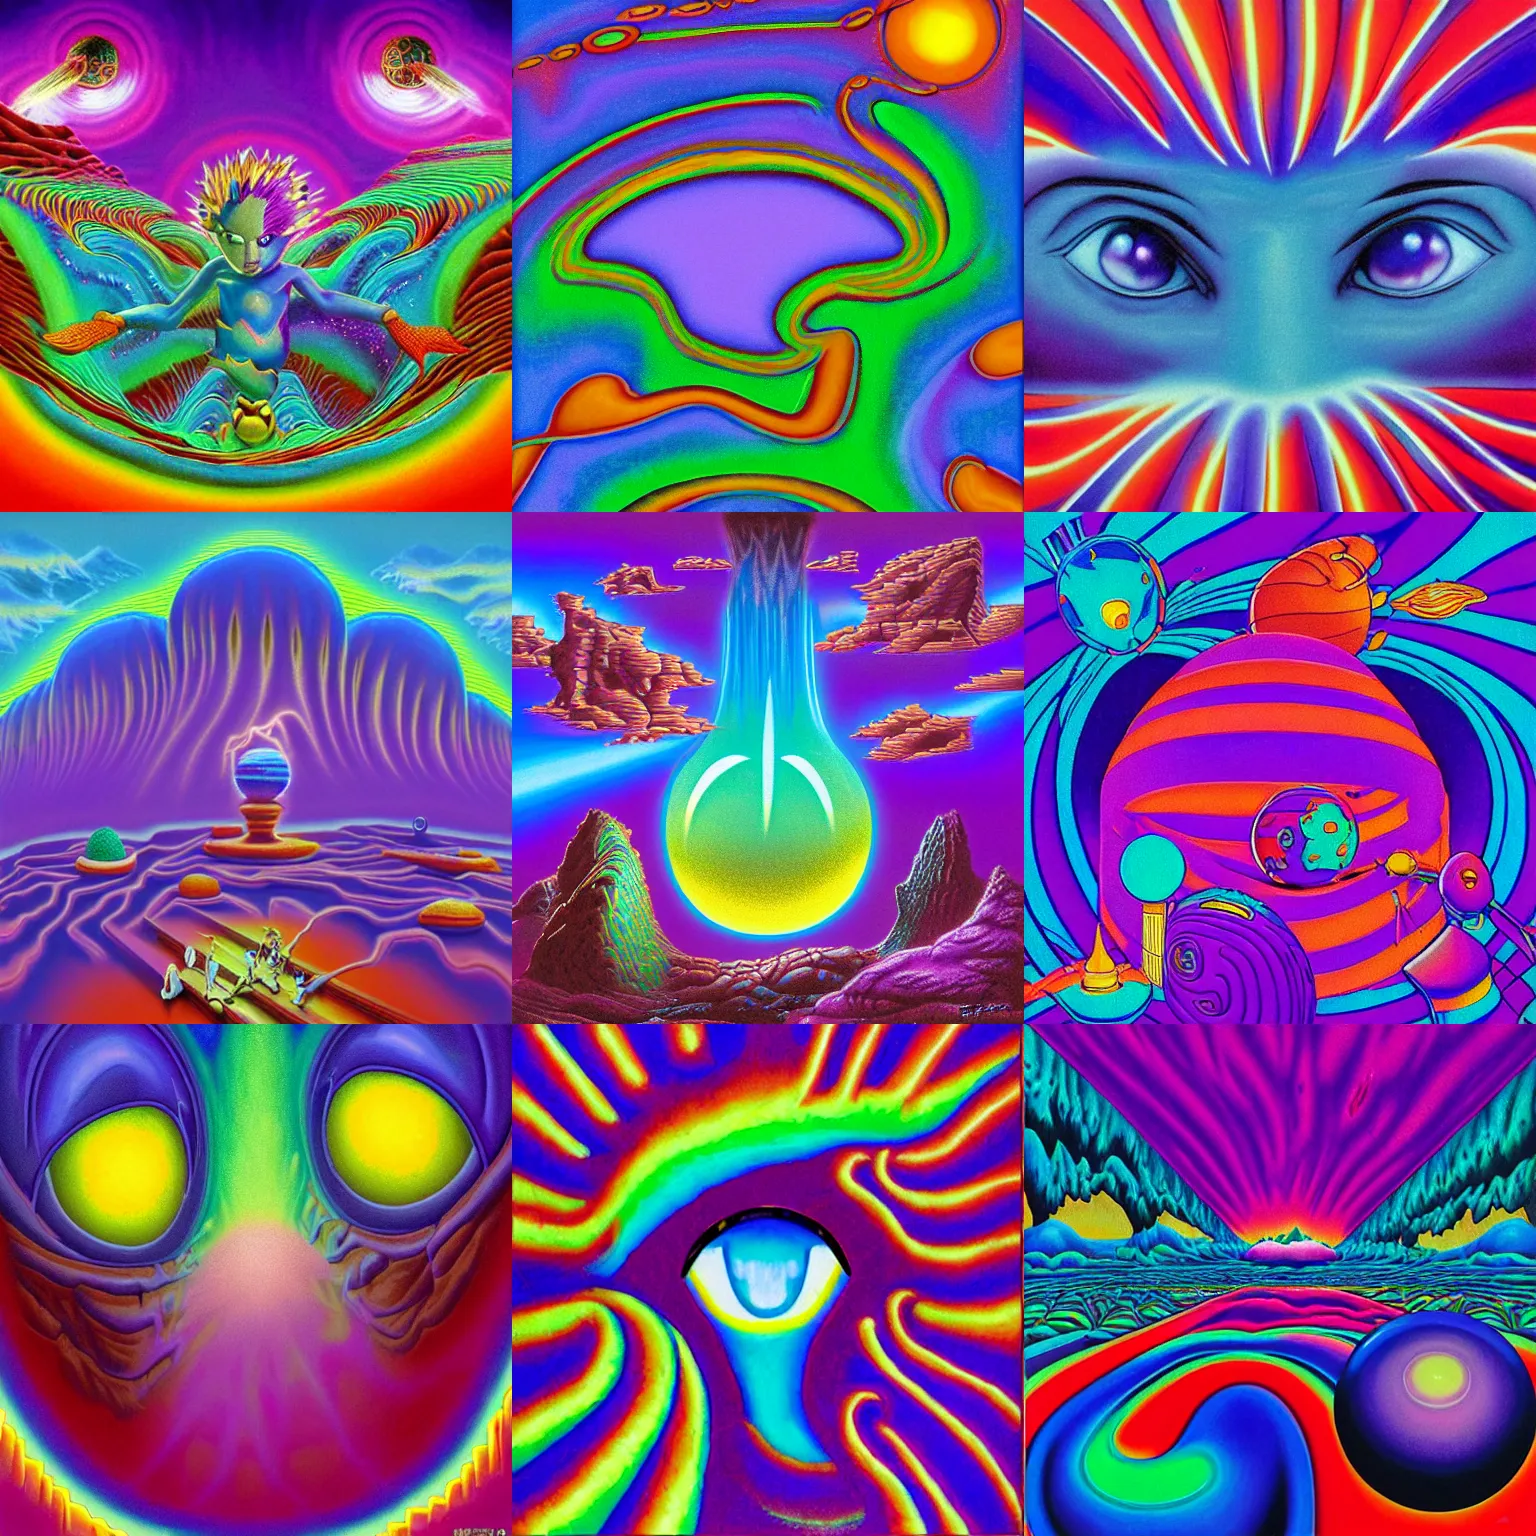 Prompt: dreaming of closeup sonic hedgehog portrait lava lamp claymation scifi matte painting landscape of a surreal alex grey, retro moulded professional soft pastels high quality airbrush art album cover of a liquid dissolving airbrush art lsd sonic the hedgehog swimming through cyberspace purple teal checkerboard background 1 9 8 0 s 1 9 8 2 sega genesis video game album cover